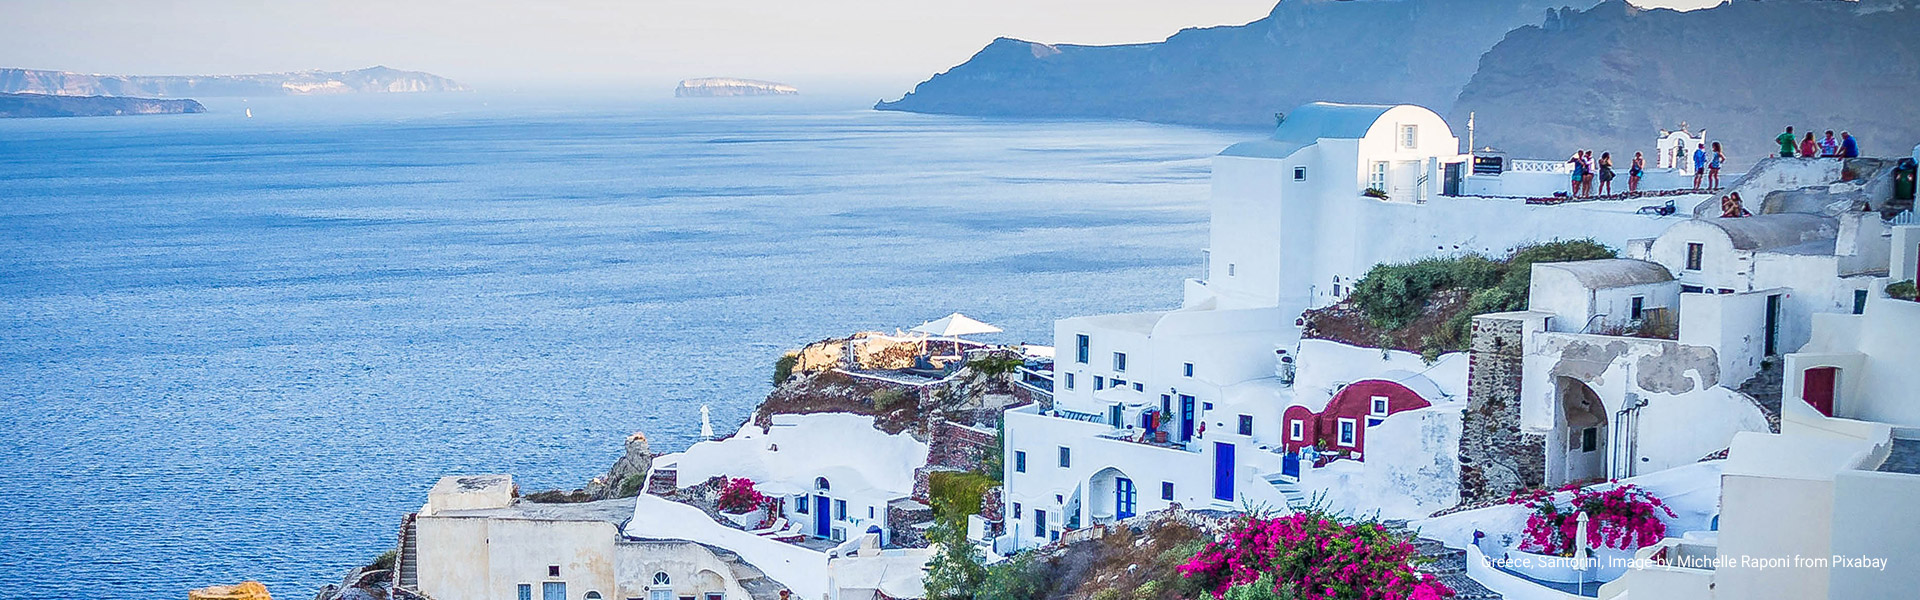 Greece, Santorini, Image by Michelle Raponi from Pixabay